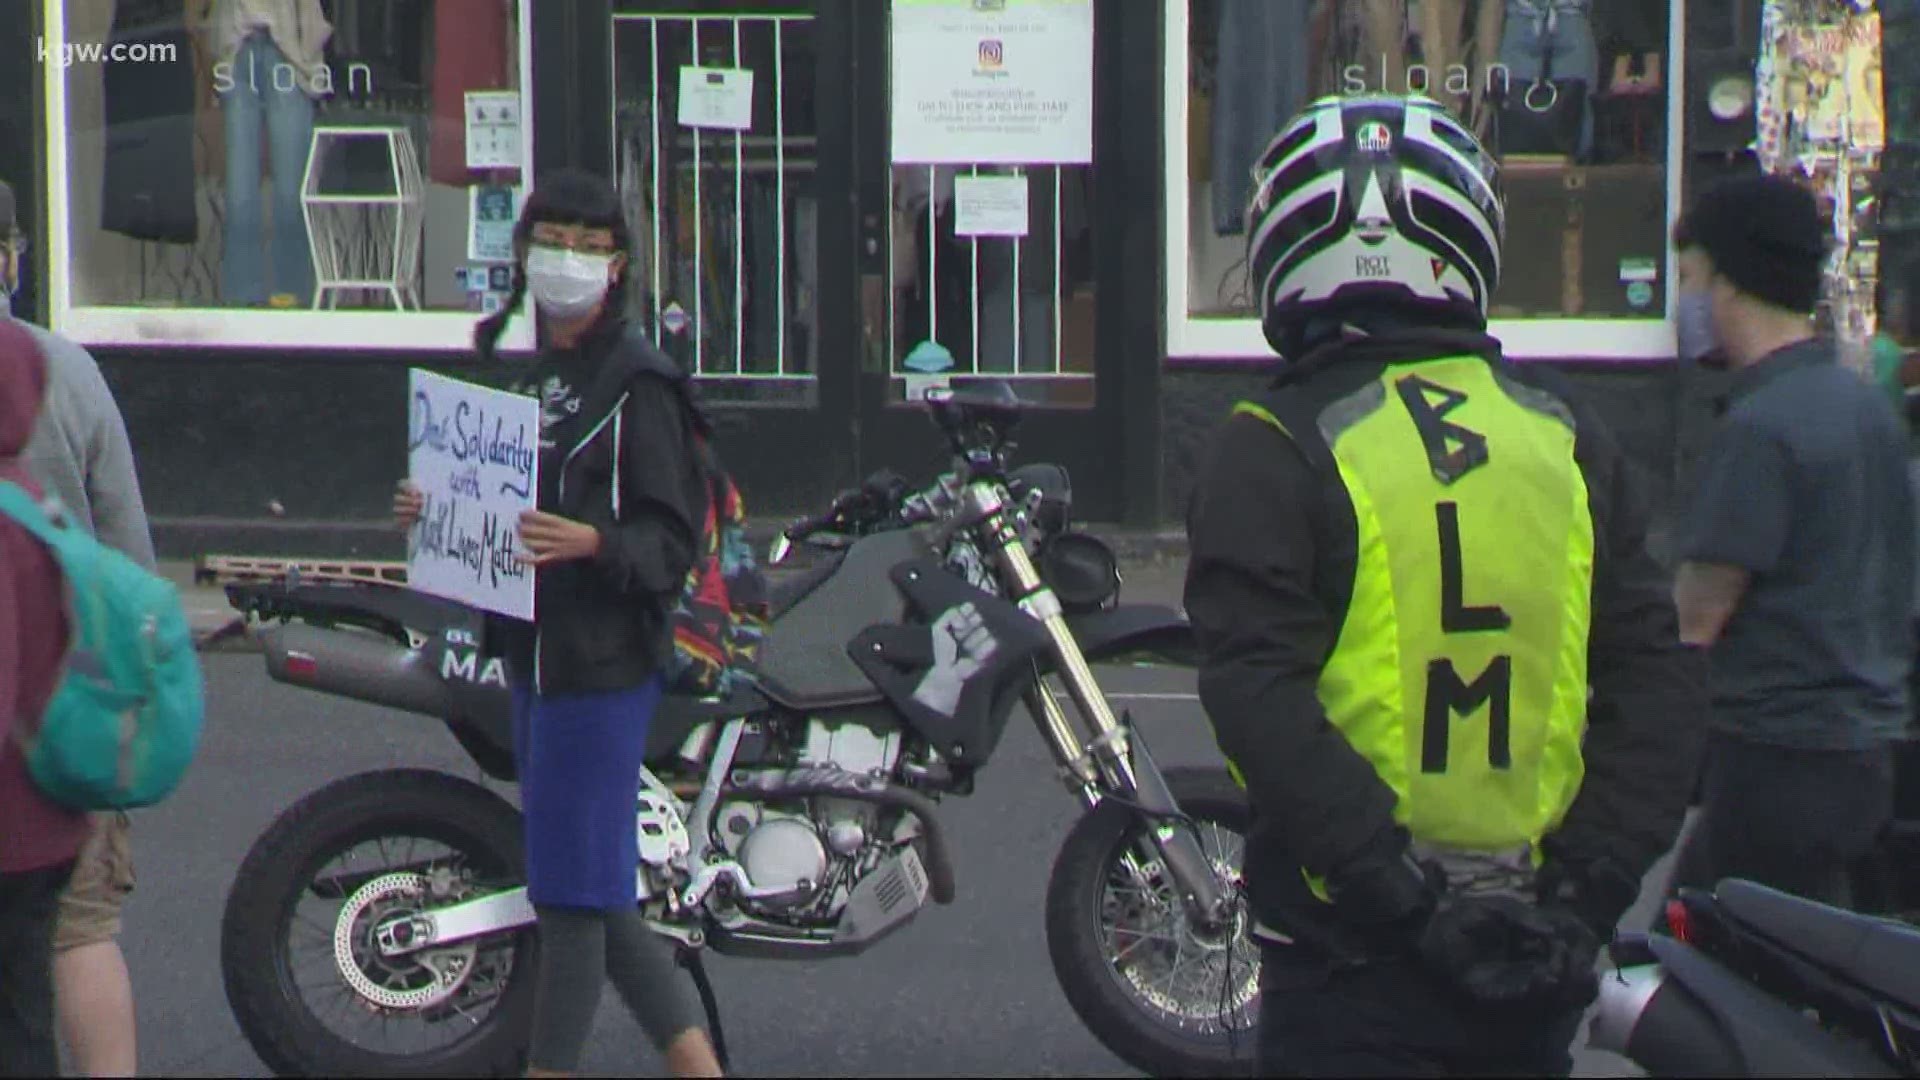 After two recent crashes involving drivers accused of hitting protesters, organizers added an extra layer of security during a Southeast Portland protest.